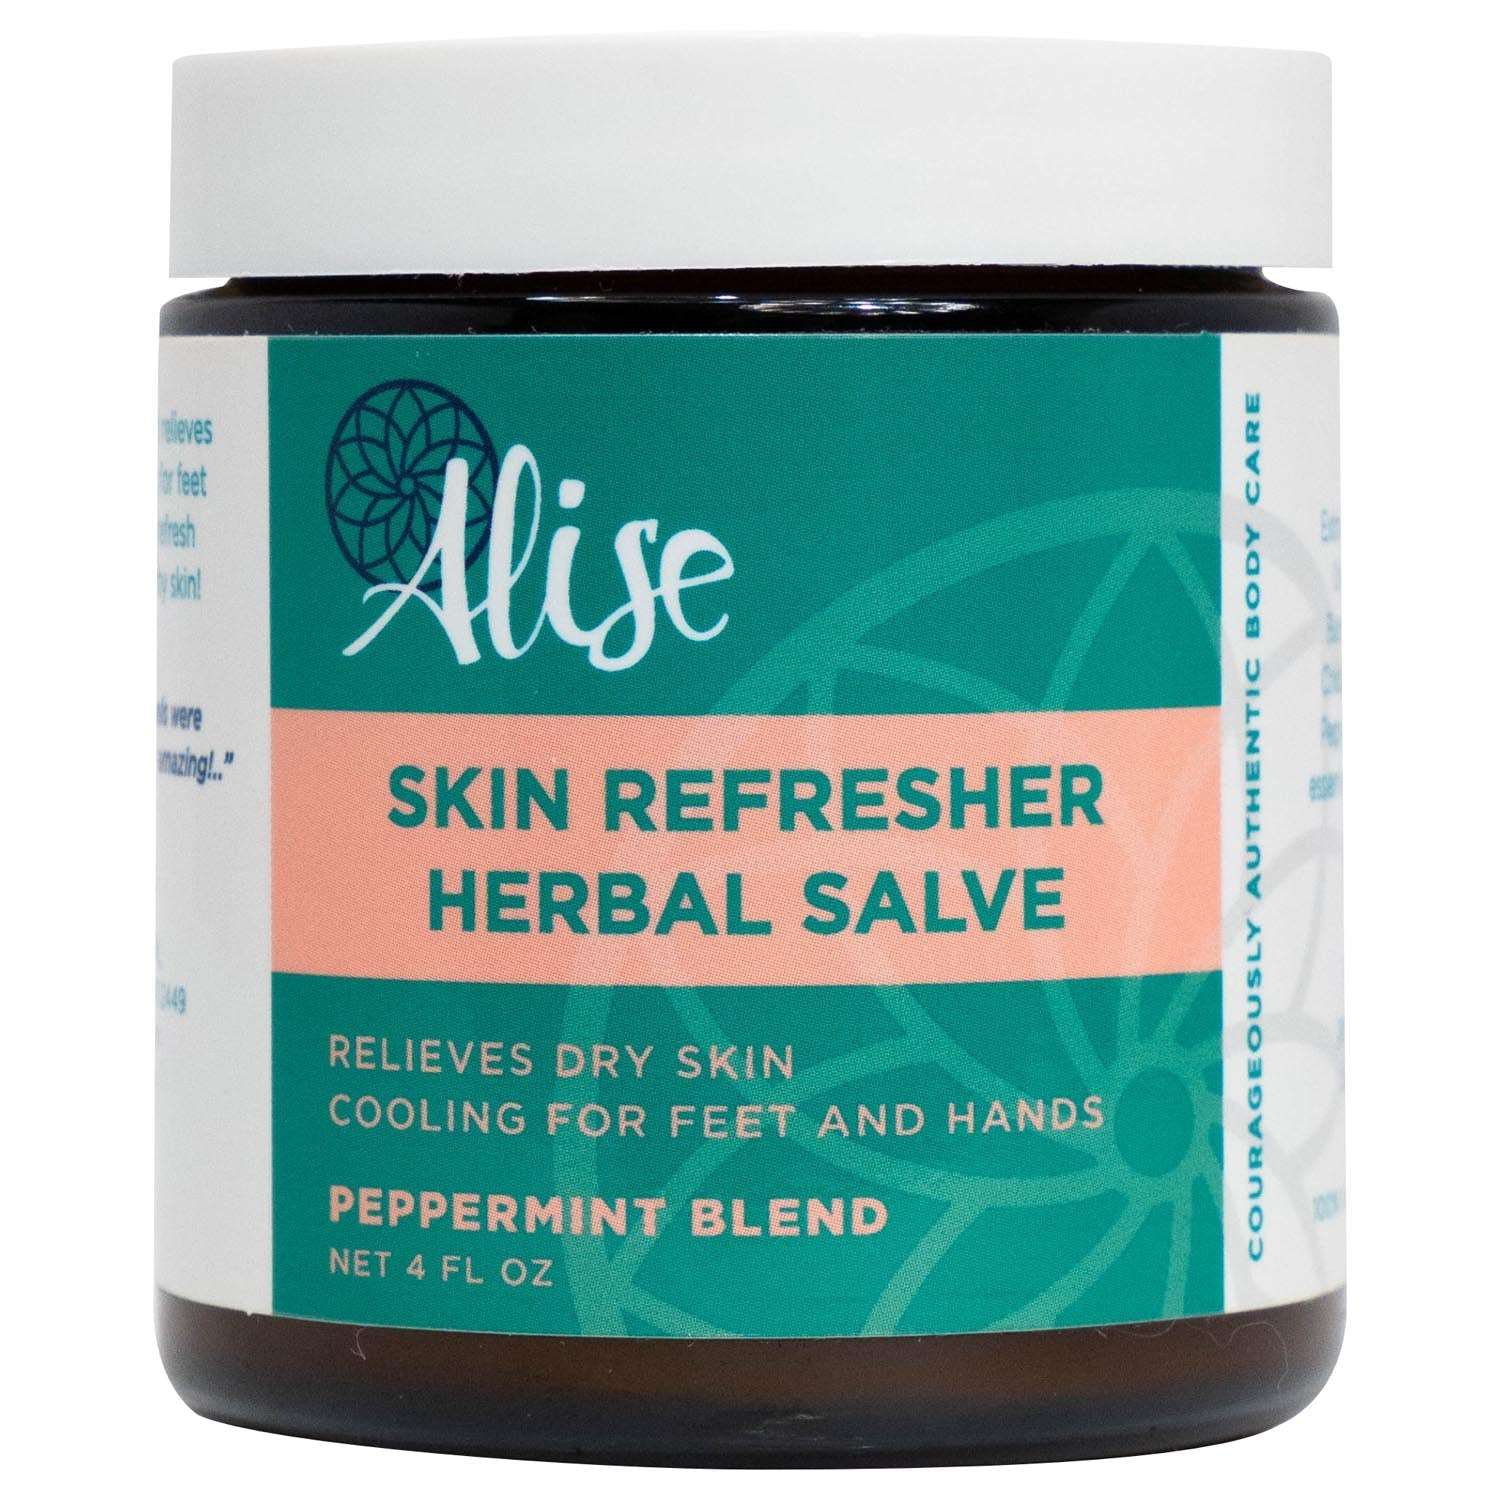 Skin Refresher Herbal Salve Peppermint Blend 4oz handcrafted by Alise Body Care